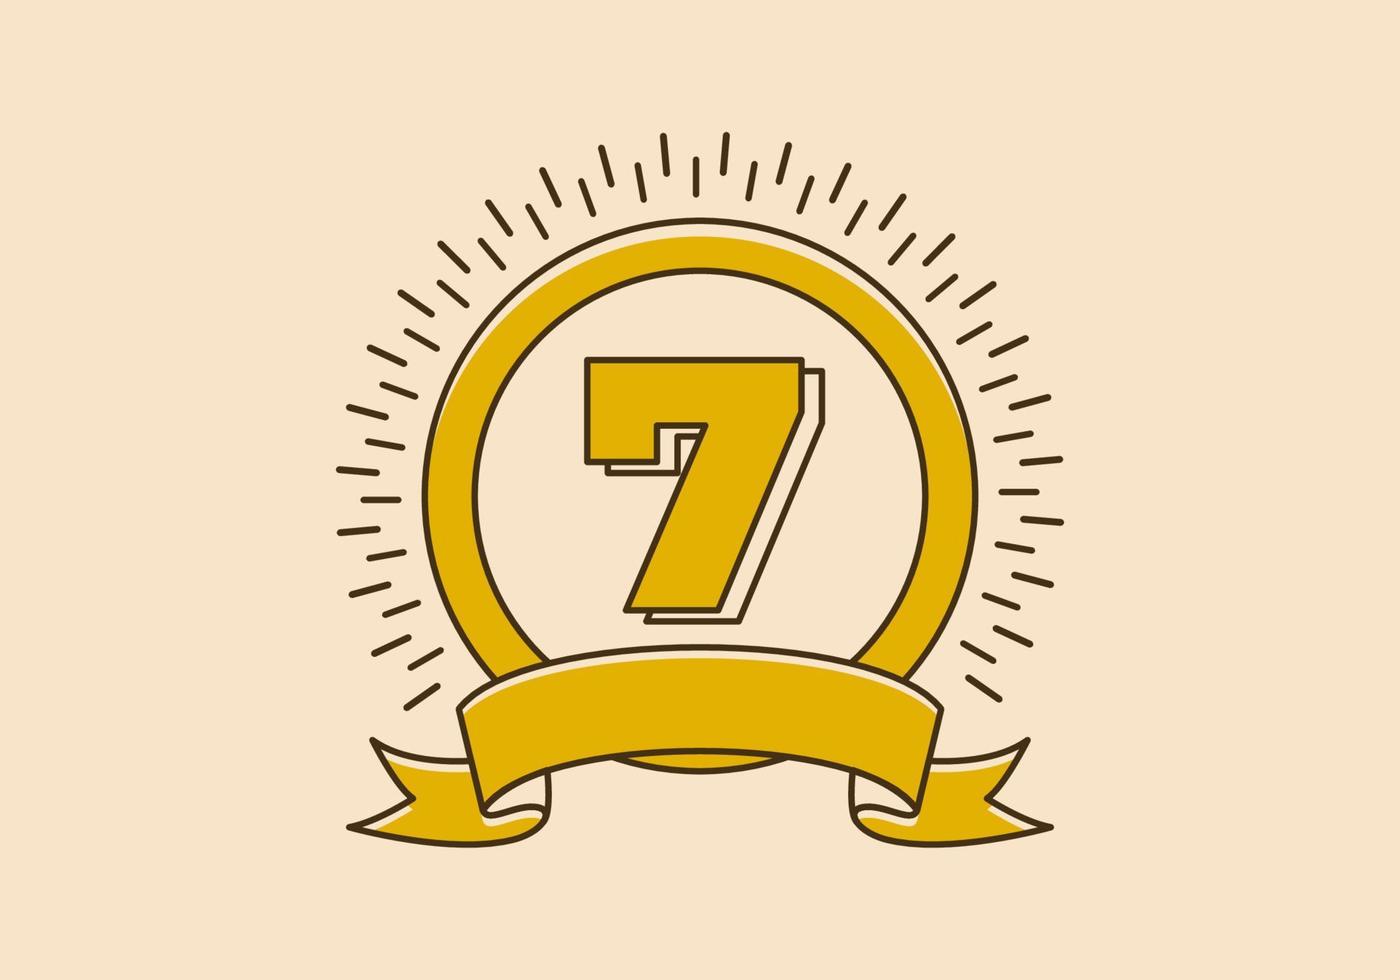 Vintage yellow circle badge with number 7 on it vector